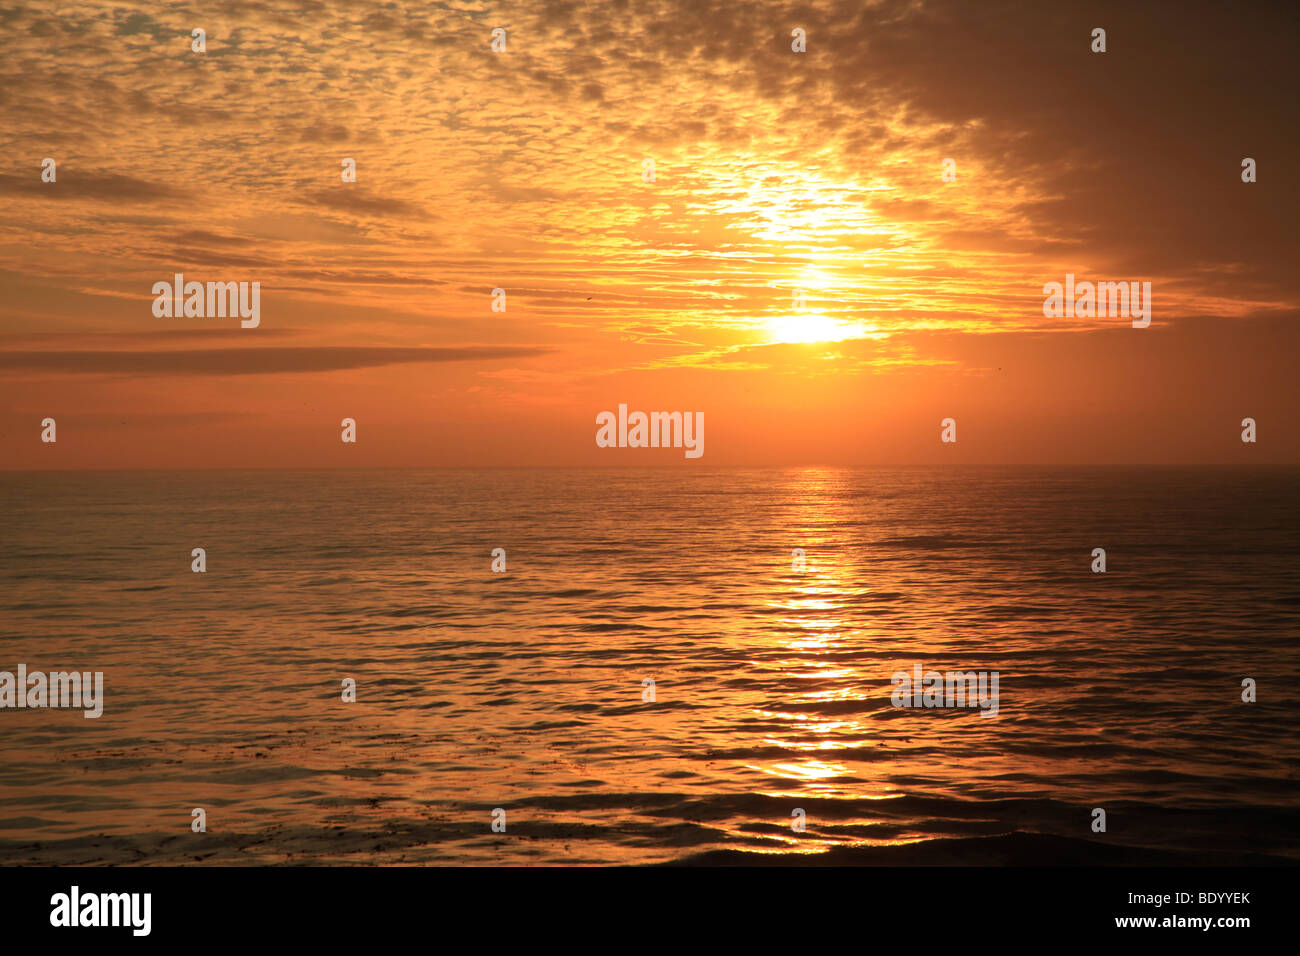 Sunrise over Pacific Ocean, South Island, New Zealand Stock Photo